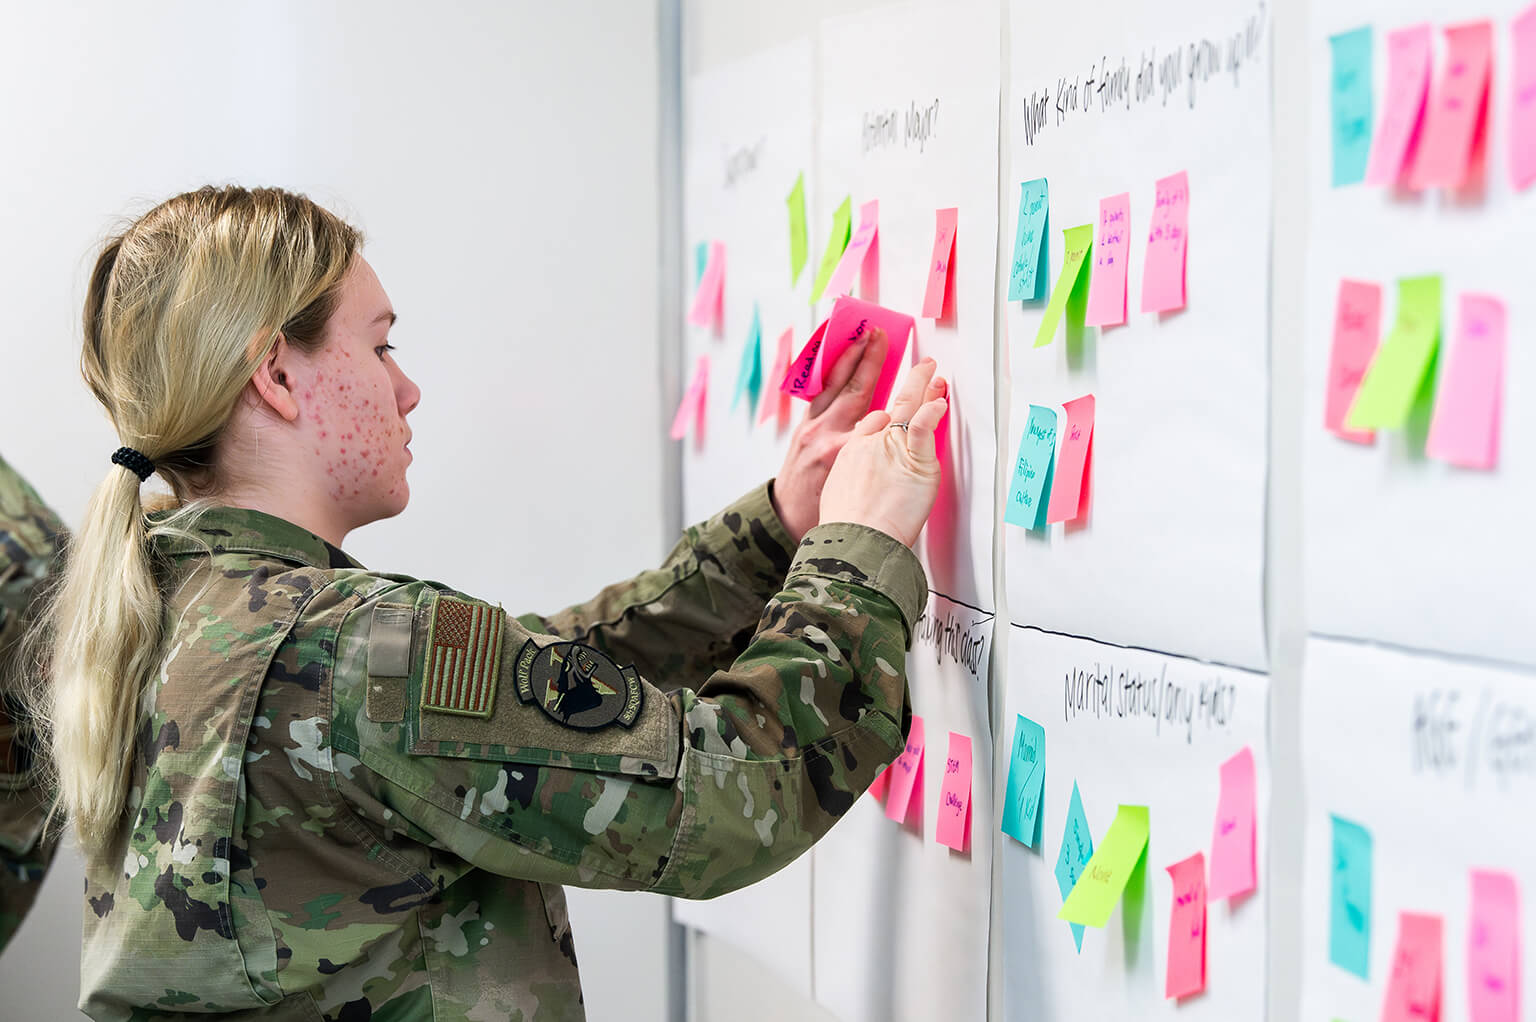 Force Academy cadet uses sticky notes as part of the problem-solving process 